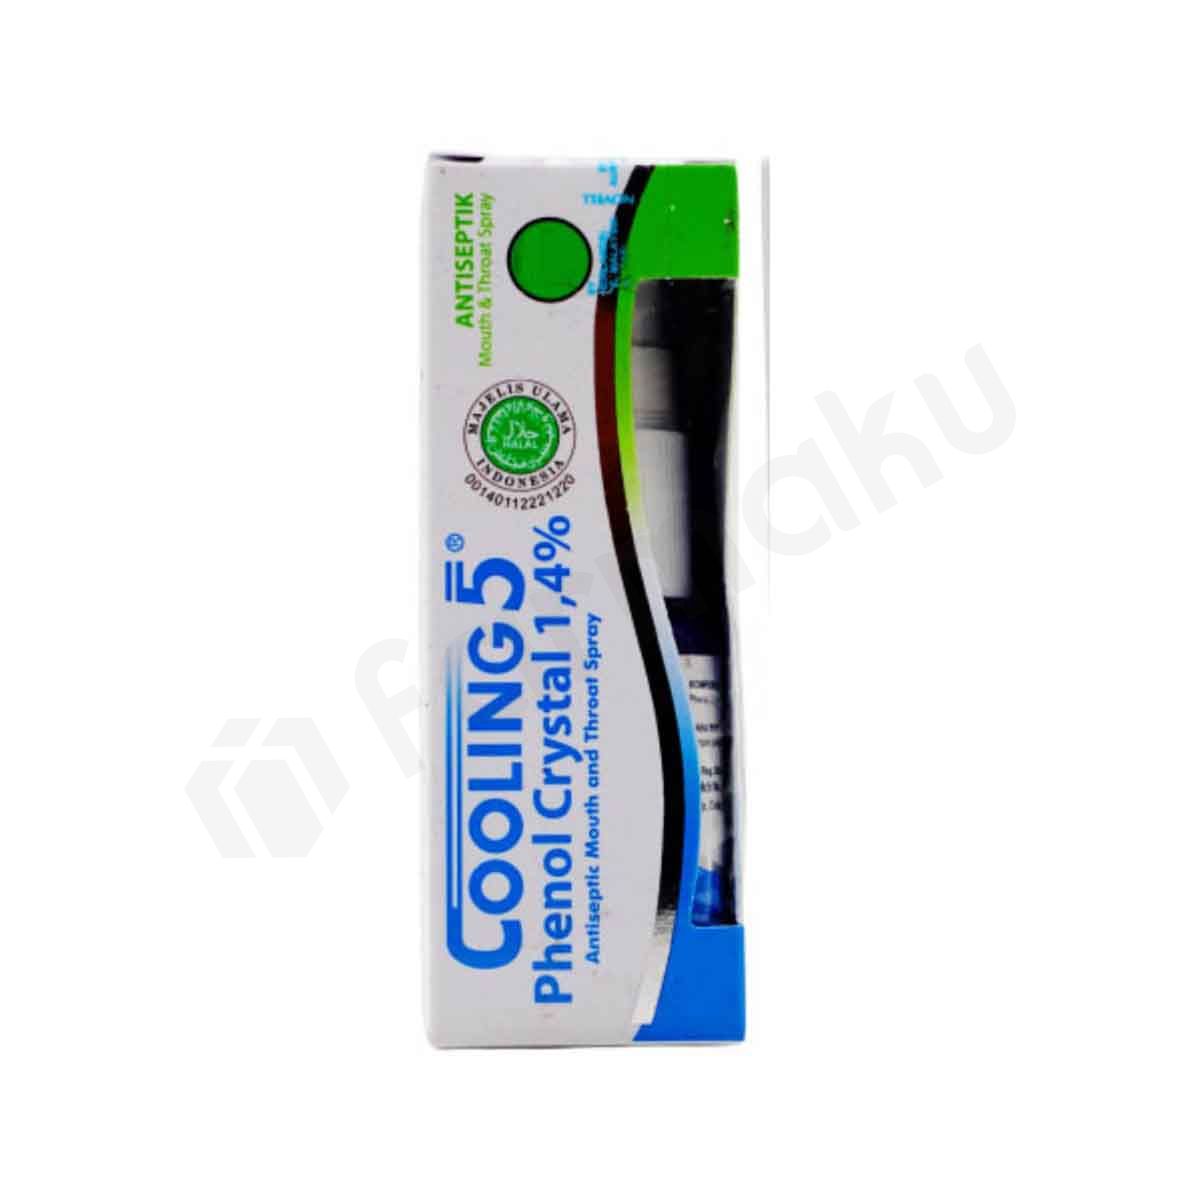 Cooling 5 Mouth Spray